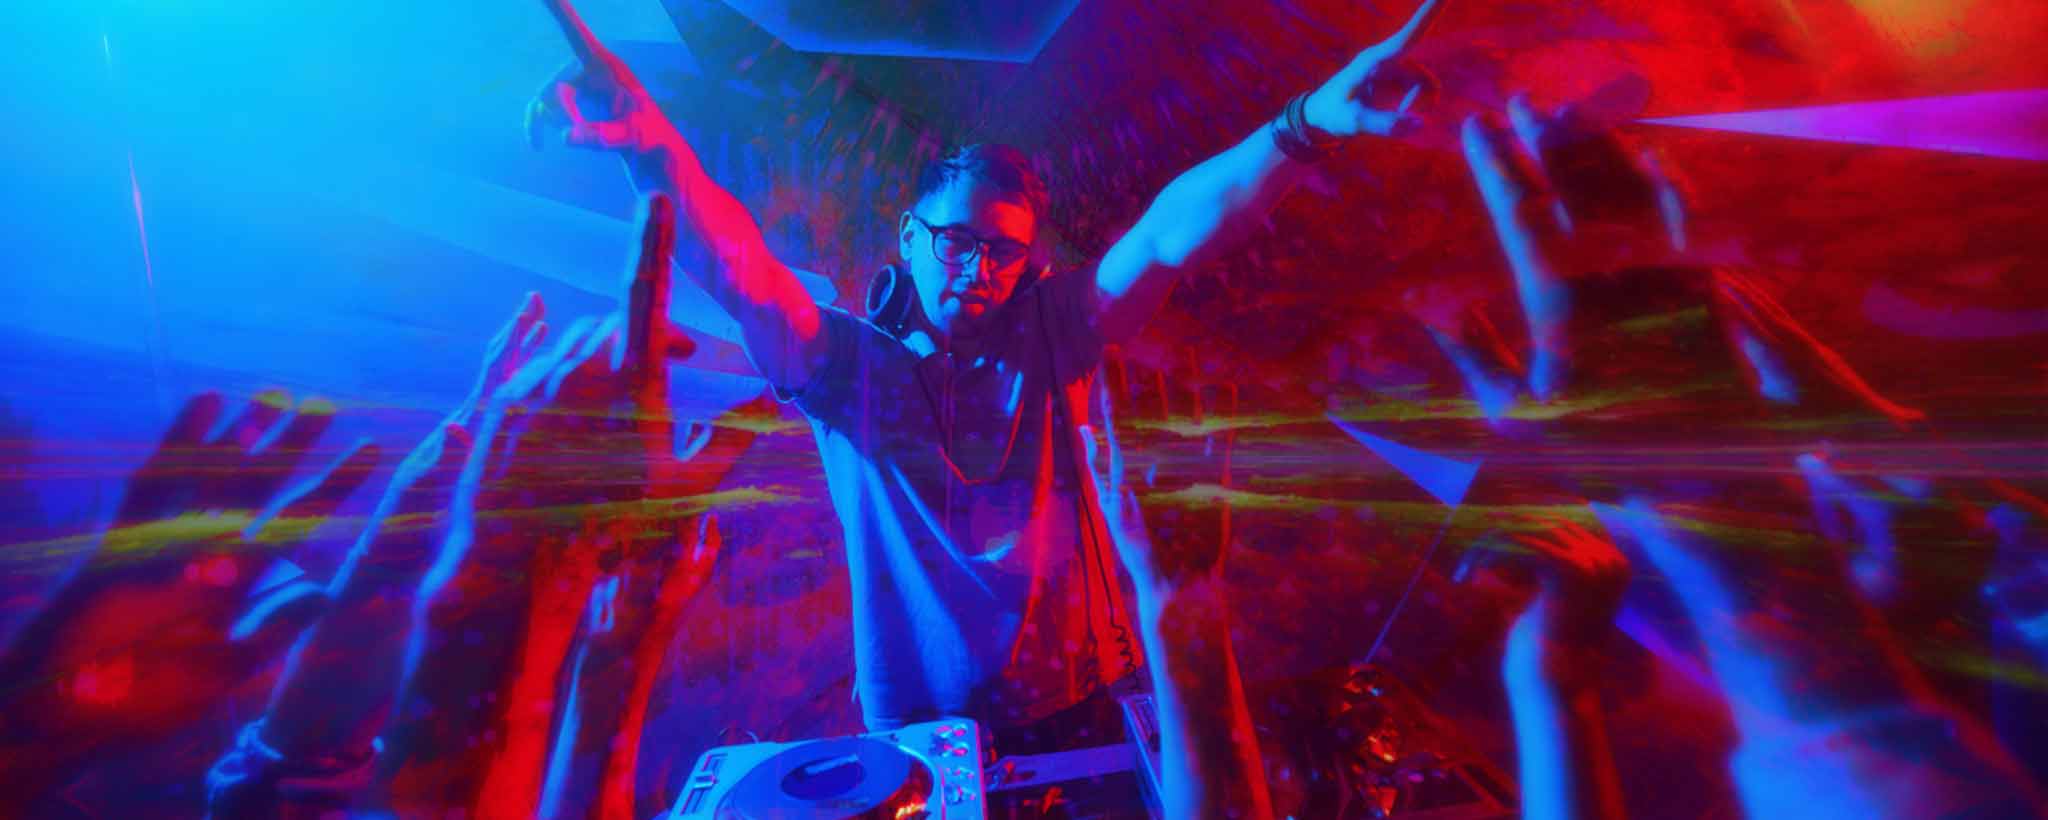 Psychedelic deejay with party hands